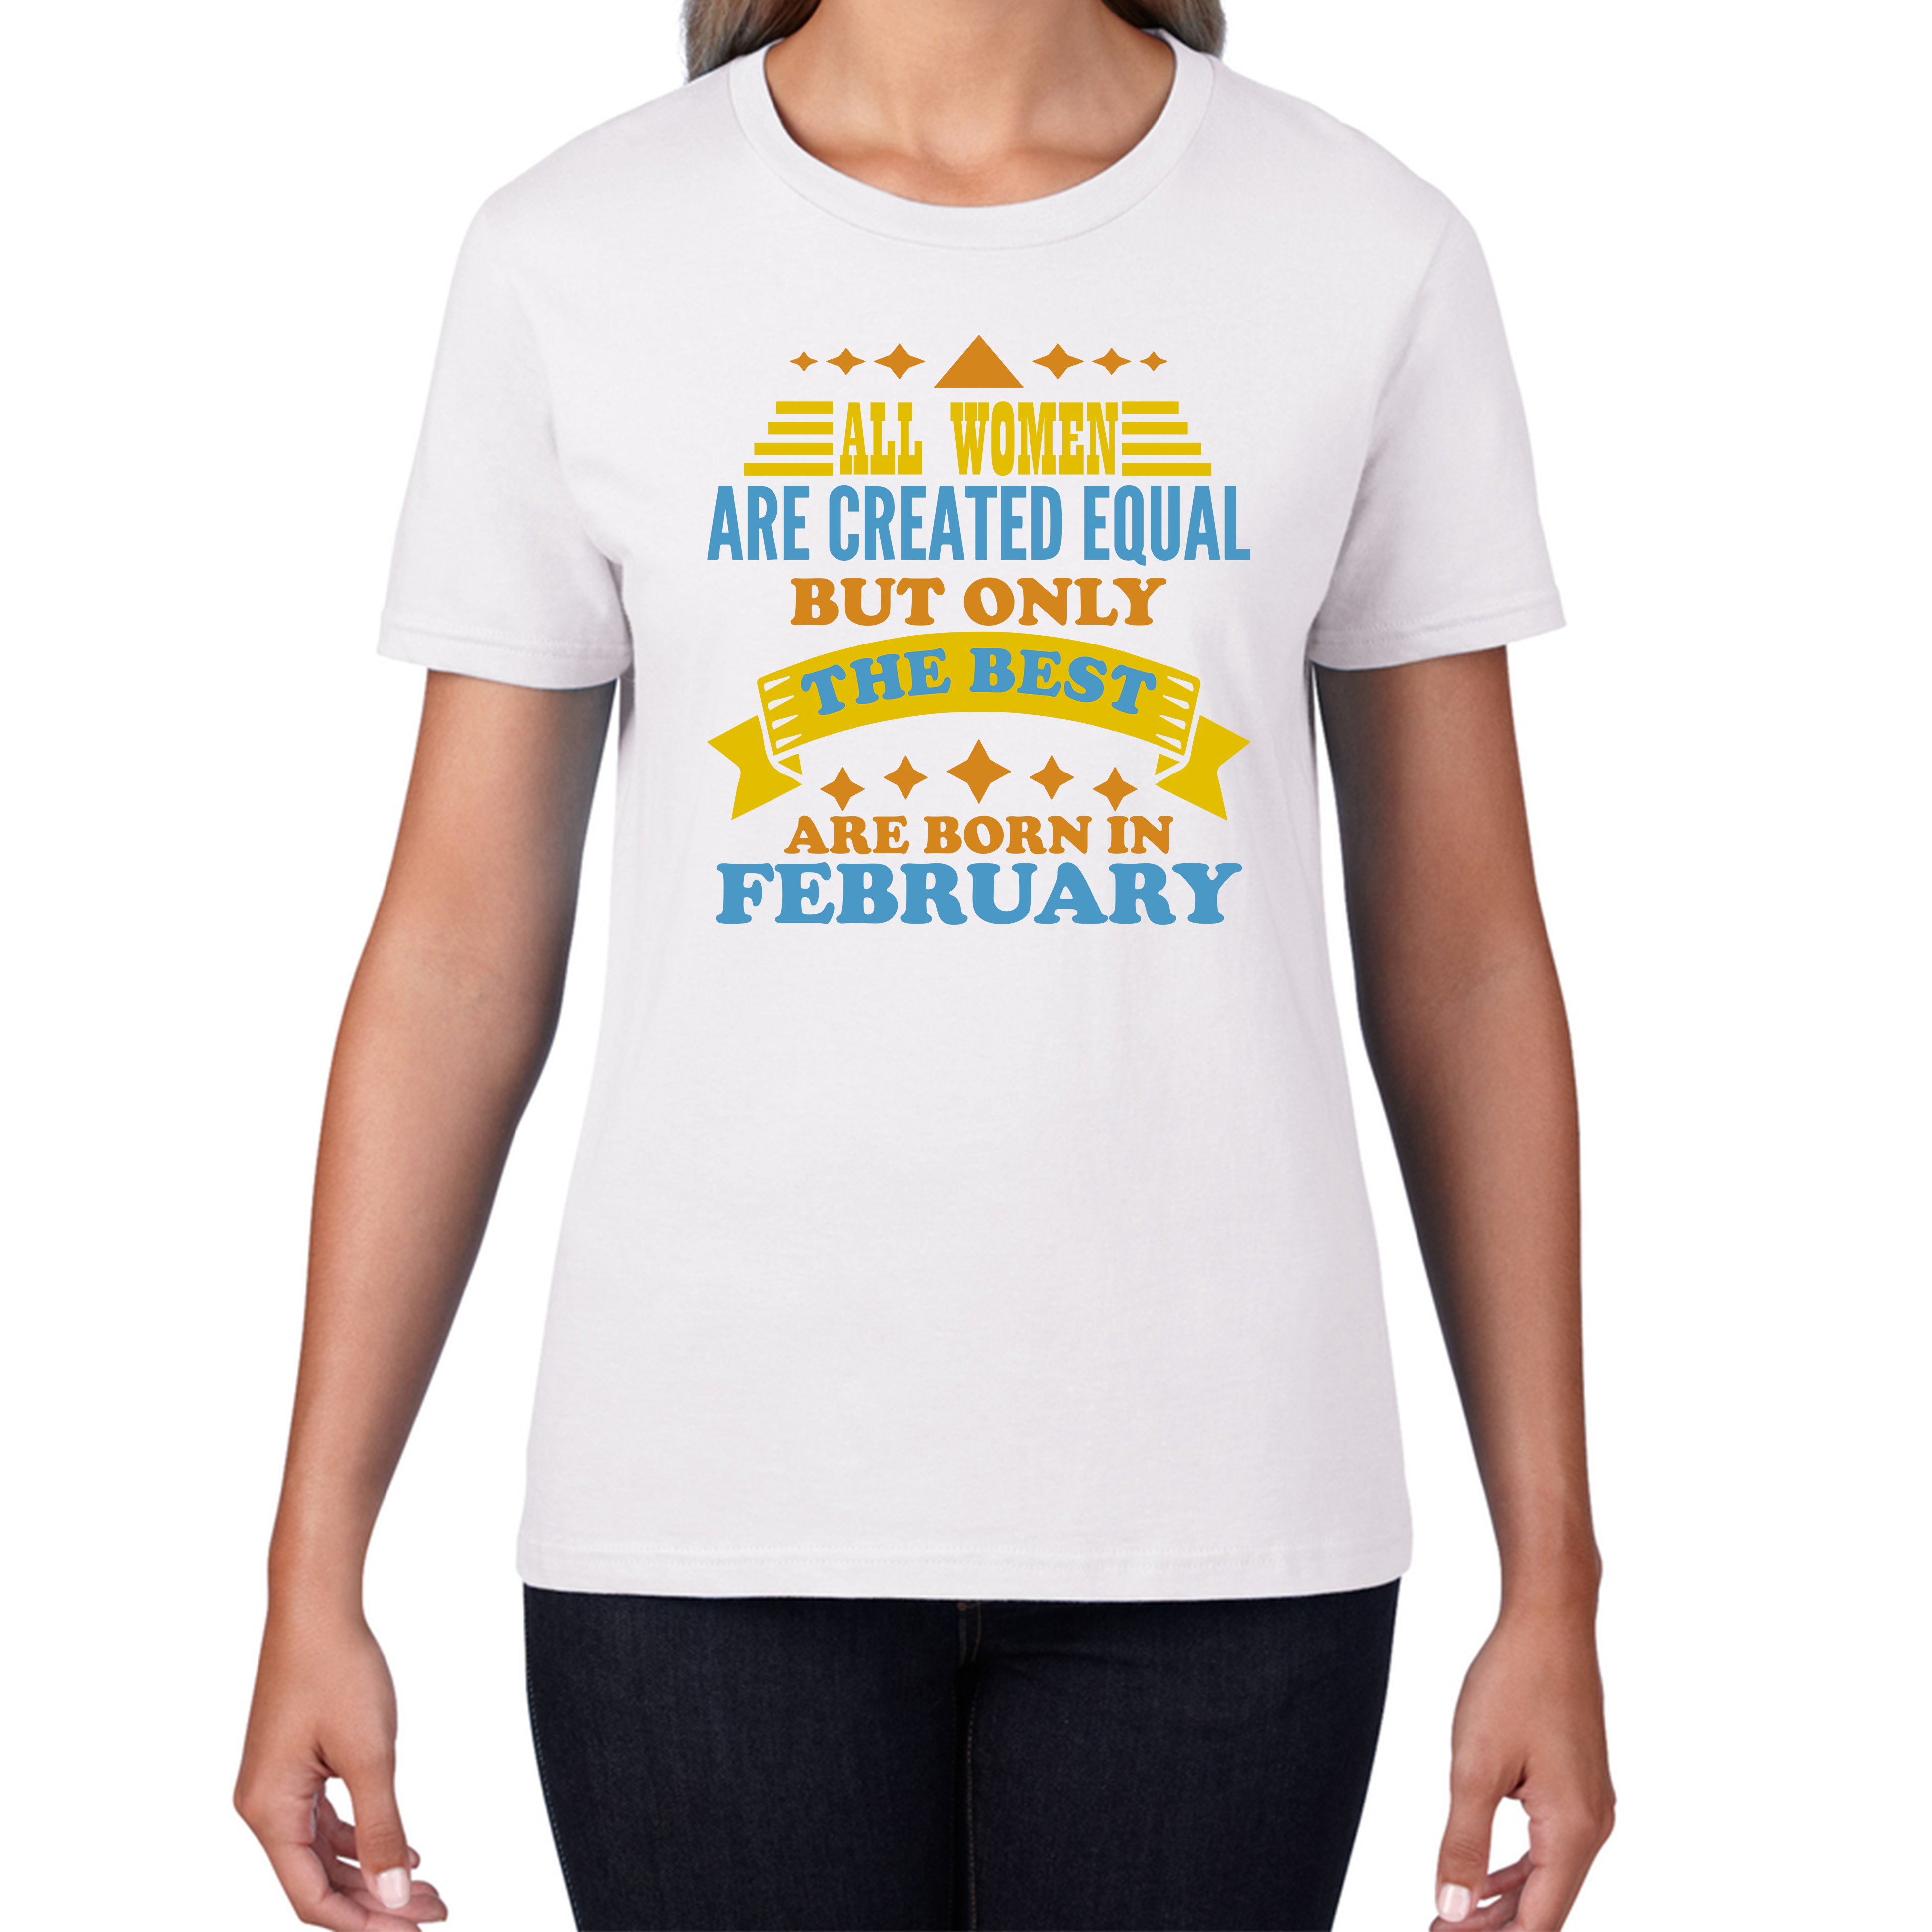 All Women Are Created Equal But Only The Best Are Born In February Funny Birthday Quote Womens Tee Top